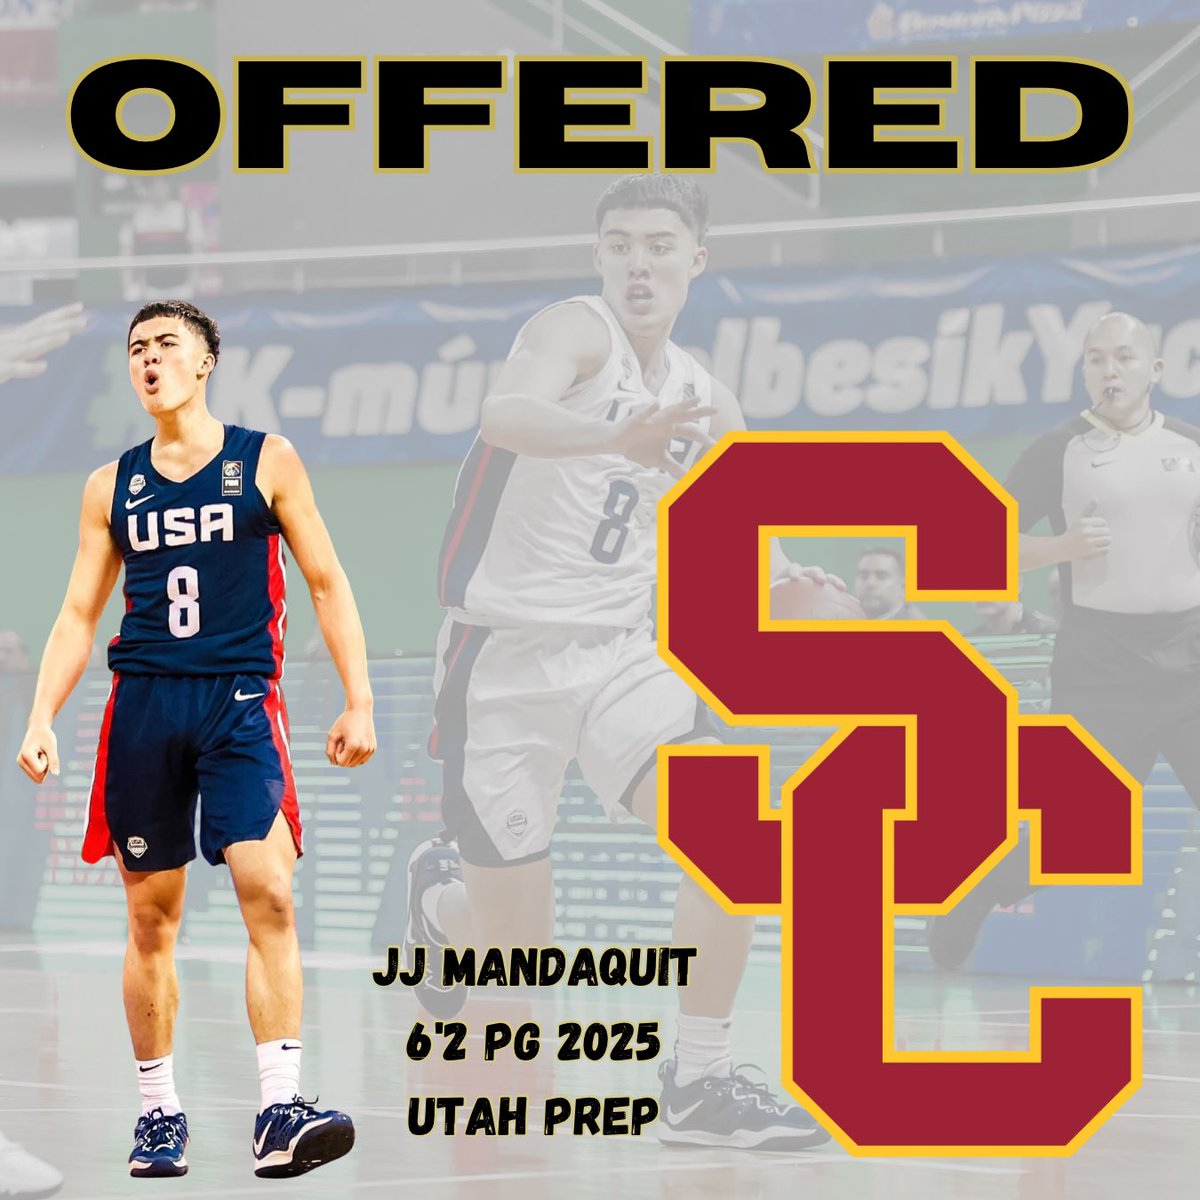 Congratulations to 2025 Utah Prep PG JJ Mandaquit who has been offered by USC!!!